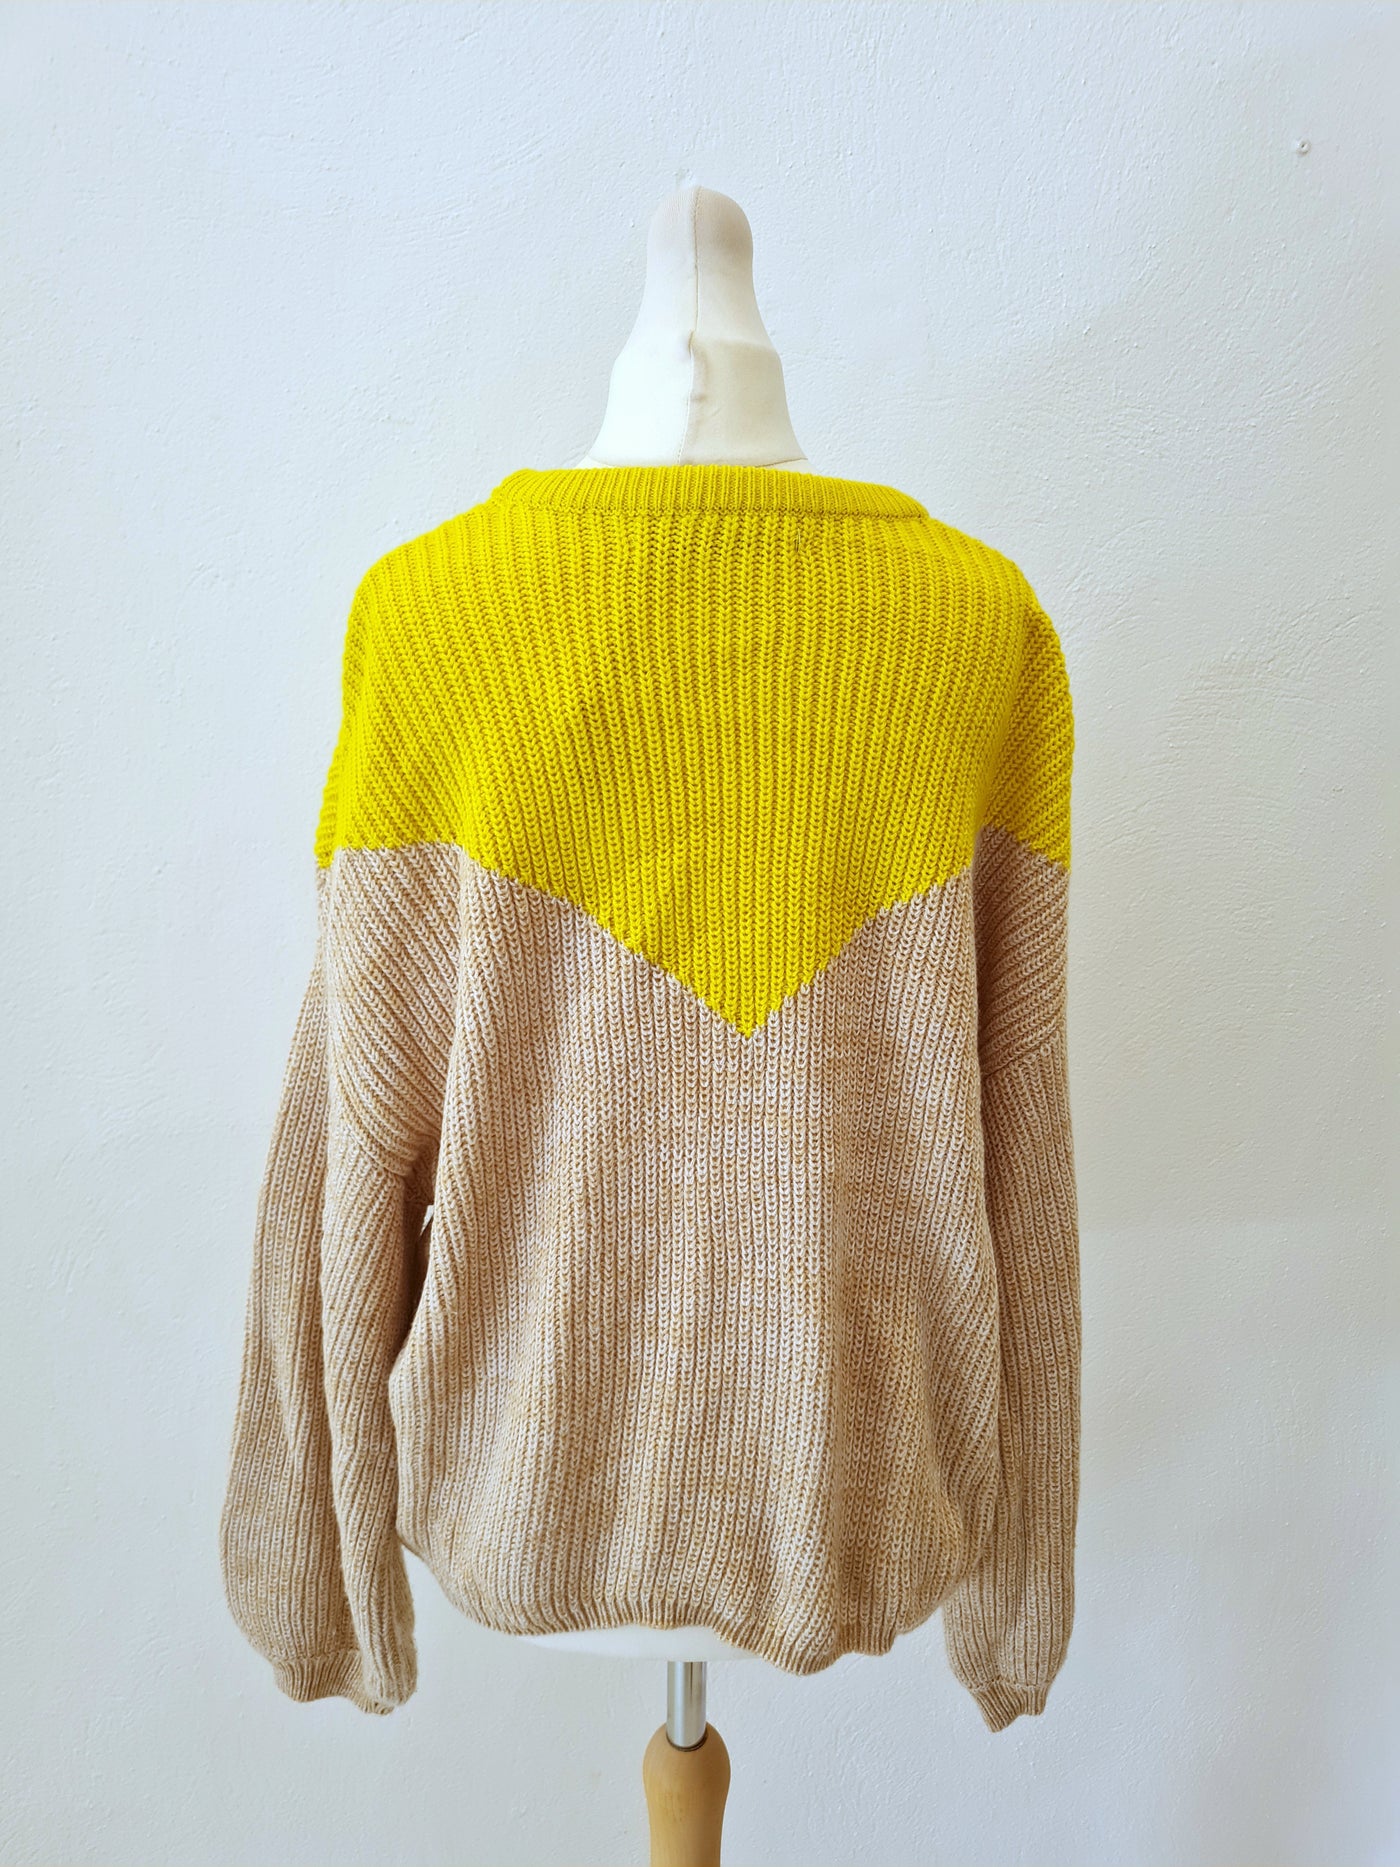 ONLY Yellow/beige jumper M